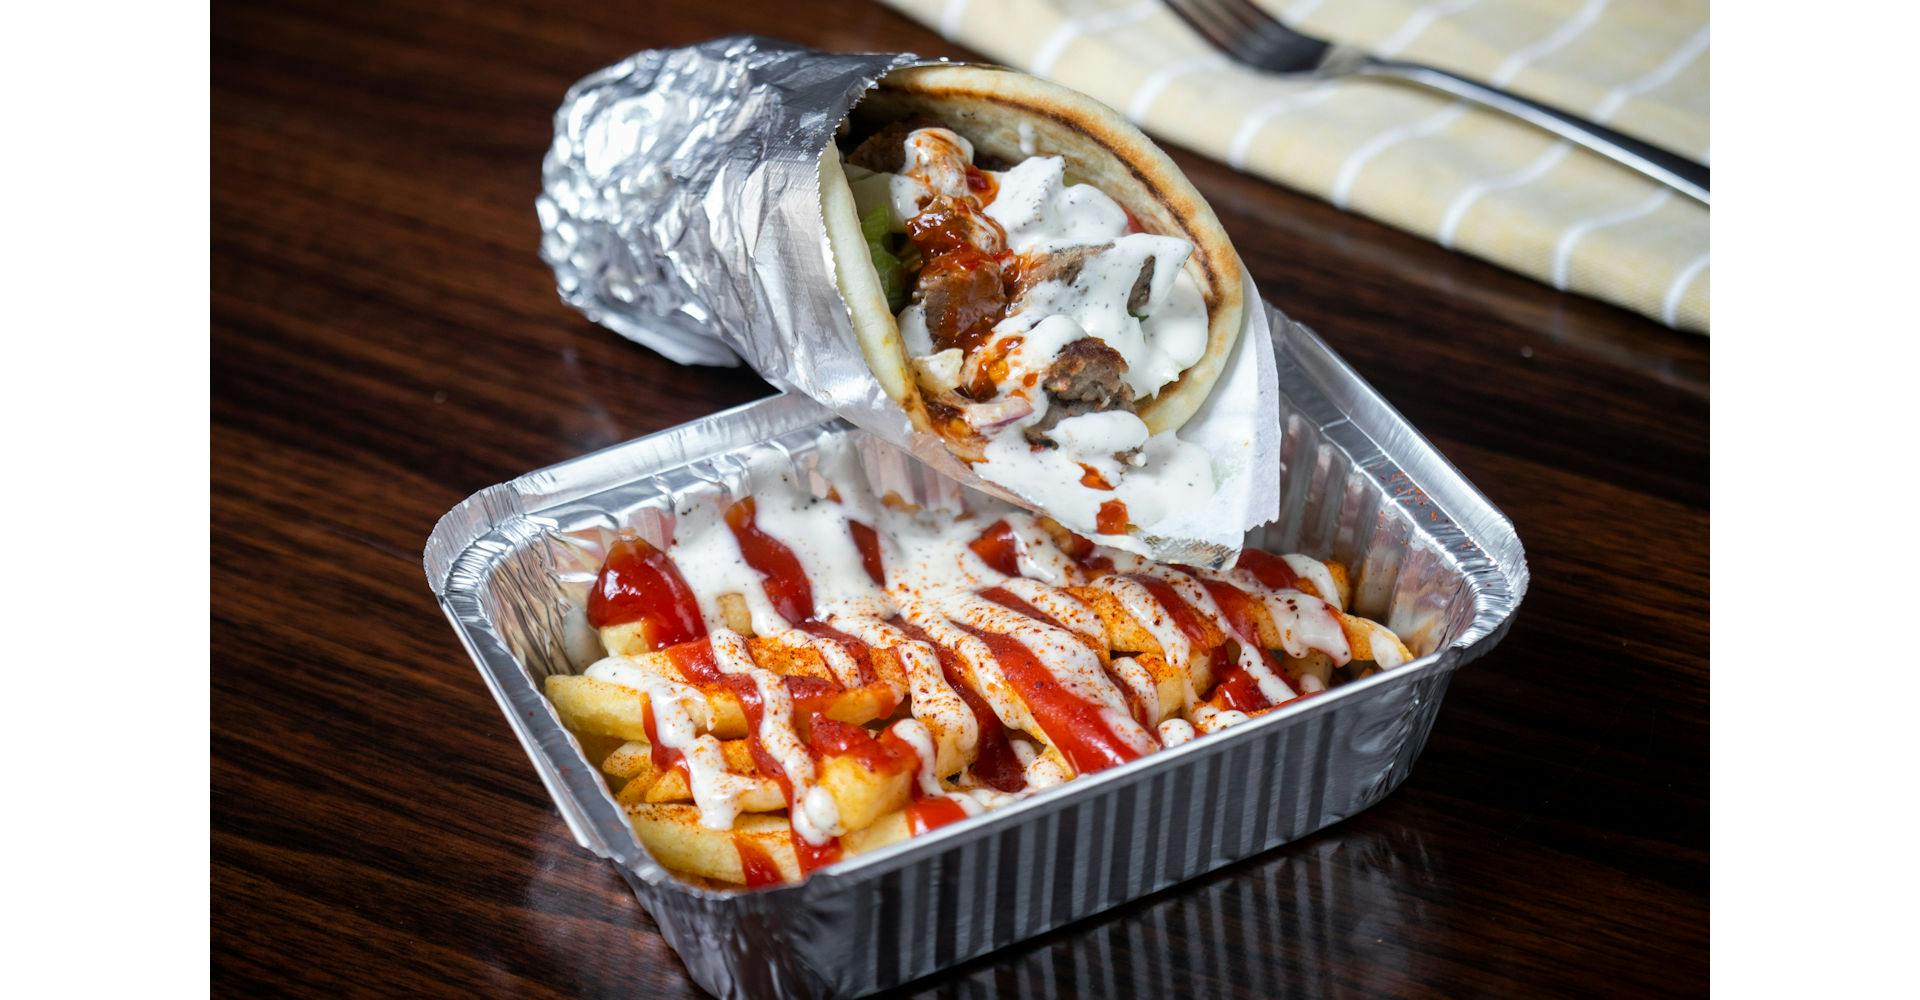 Gyro Wrap Comes With Fries from Austin's Habibi in Austin, TX